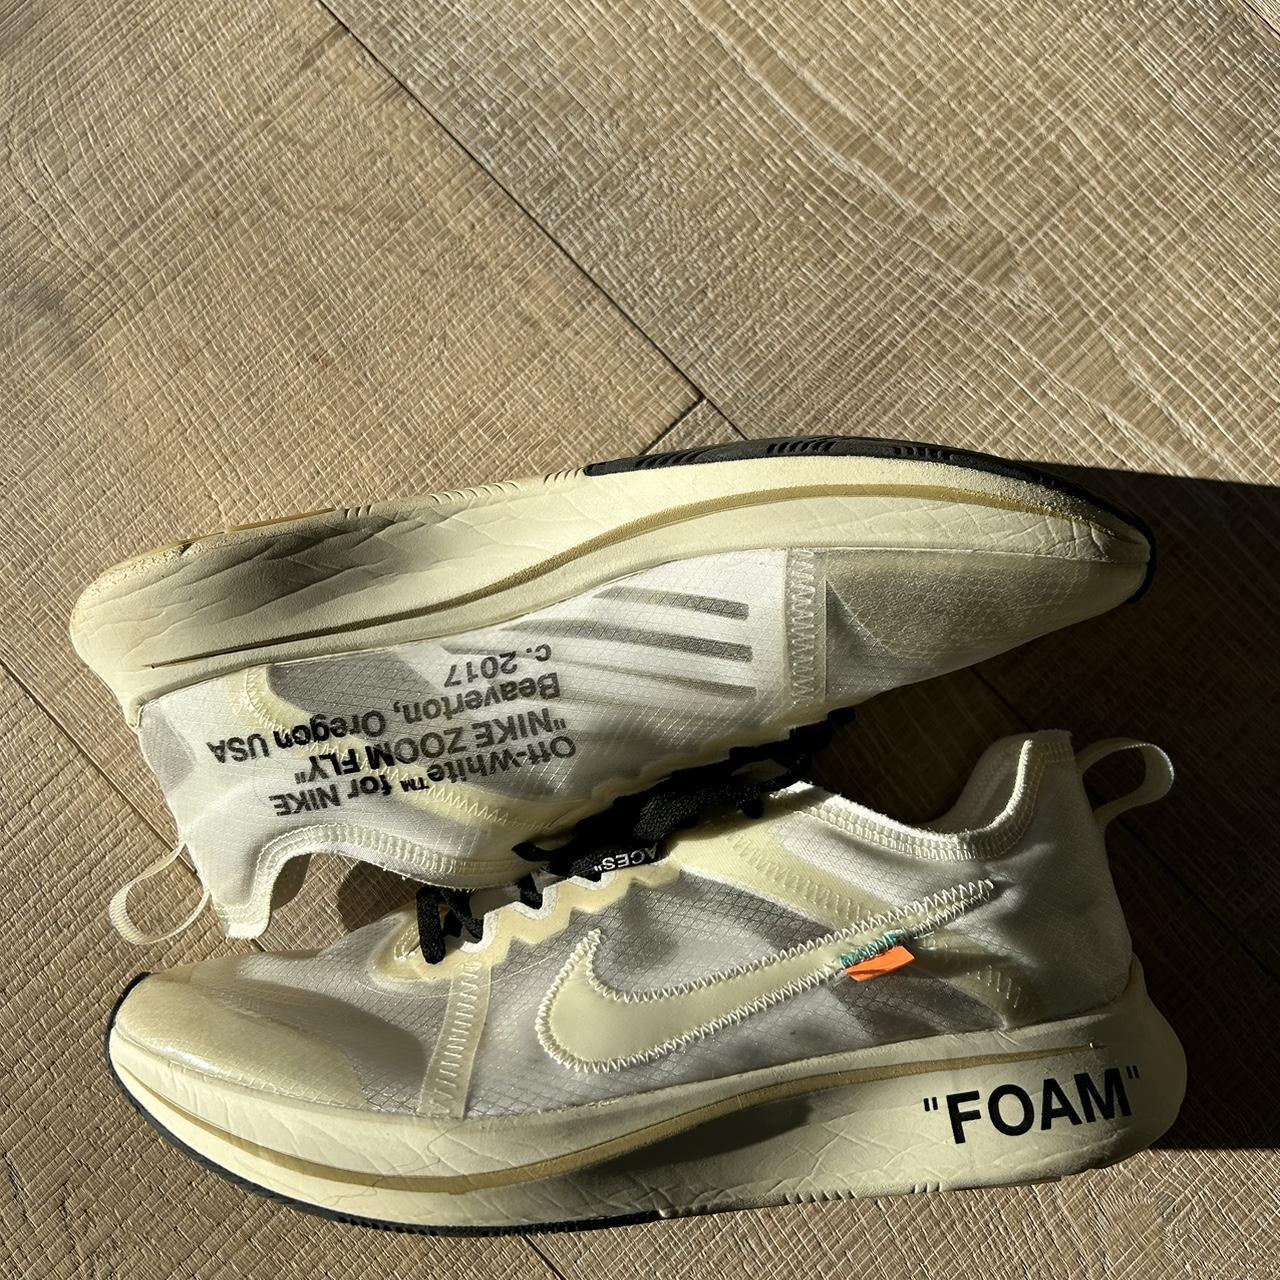 OFF WHITE Nike Zoom Fly Sp “The Ten” size 9.5 taking... - Depop